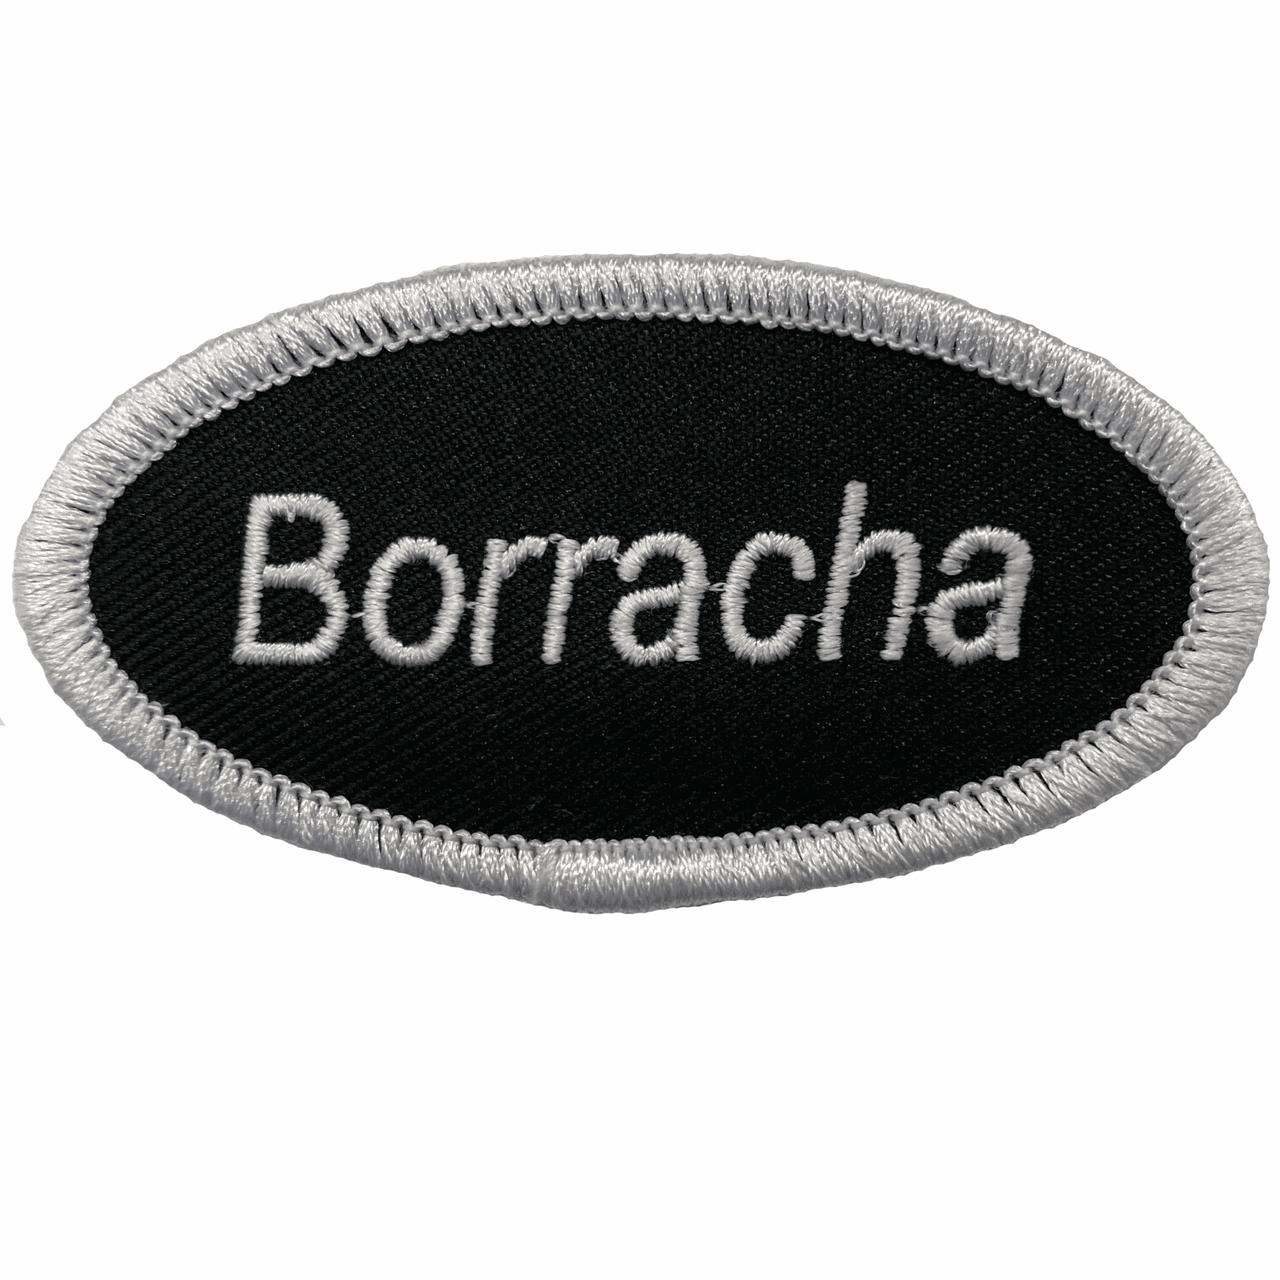 Borracha Embroidered Patch